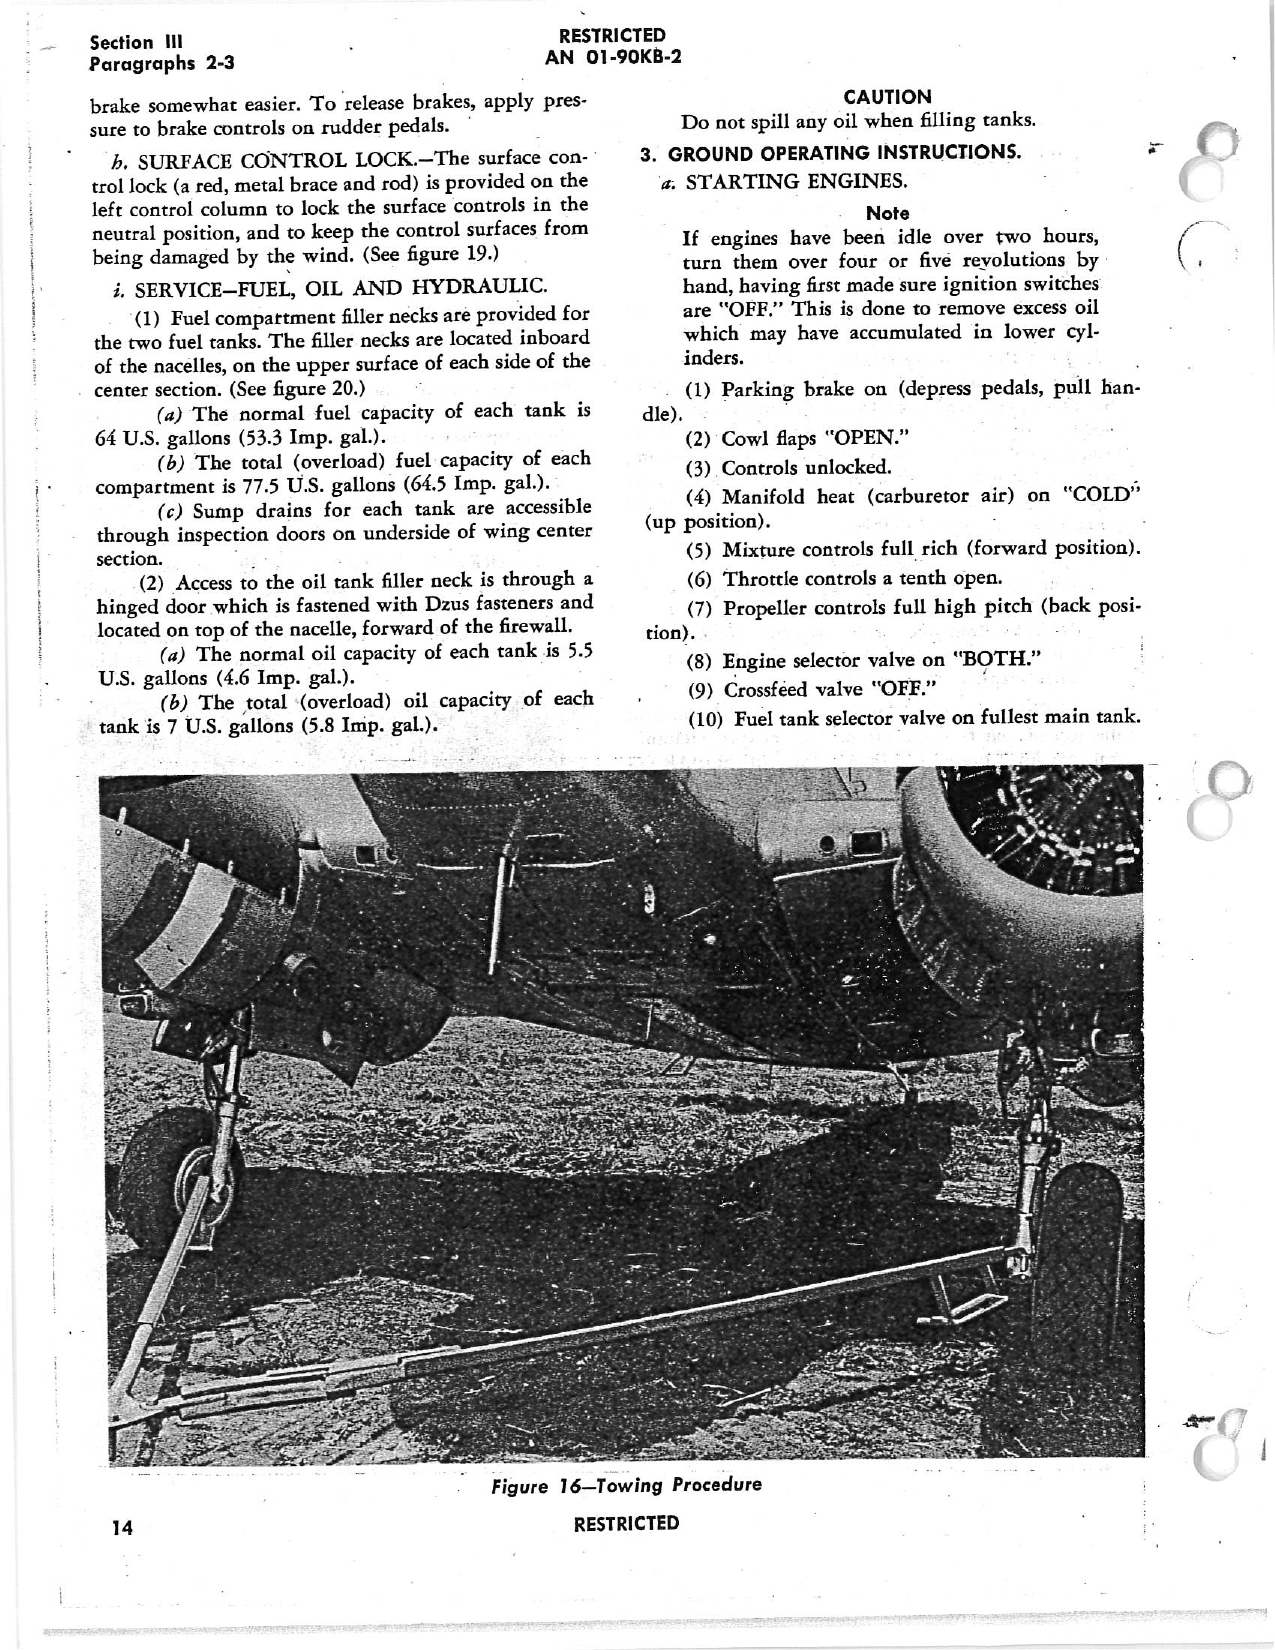 Sample page 8 from AirCorps Library document: Erection and Maintenance Instructions for AT-10